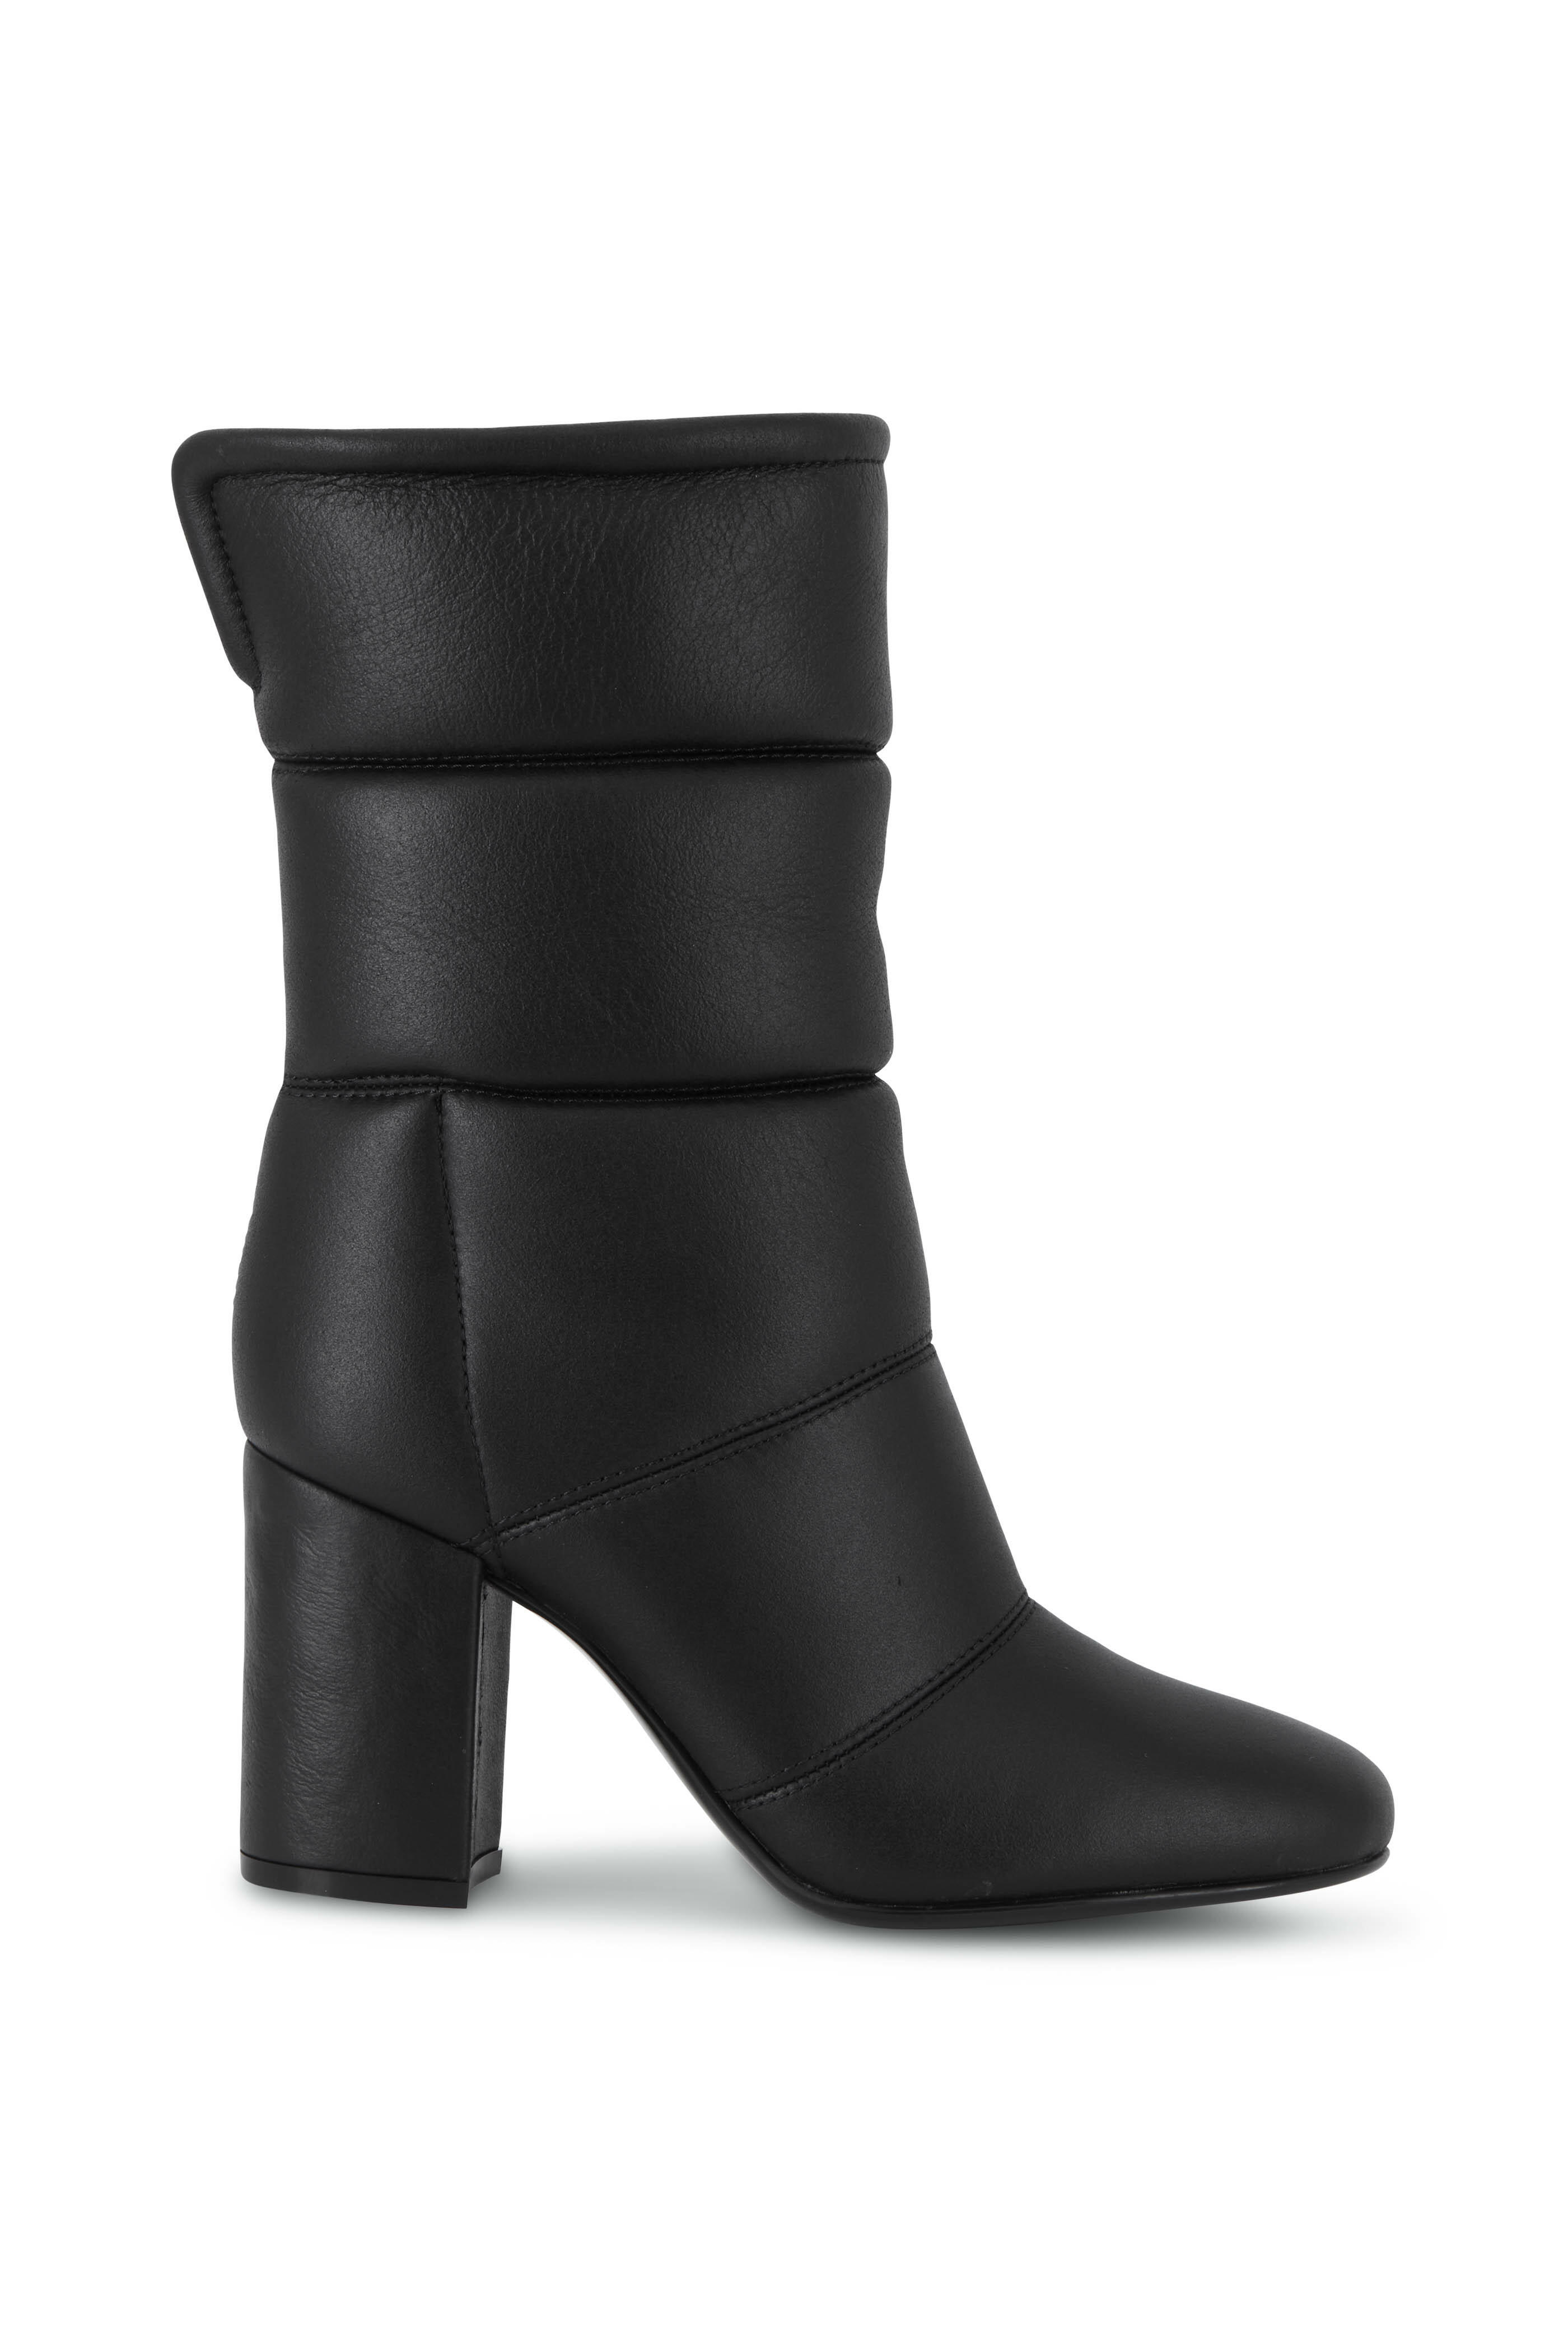 Gianvito Rossi - Black Padded Leather Mid-Calf Boot, 85mm